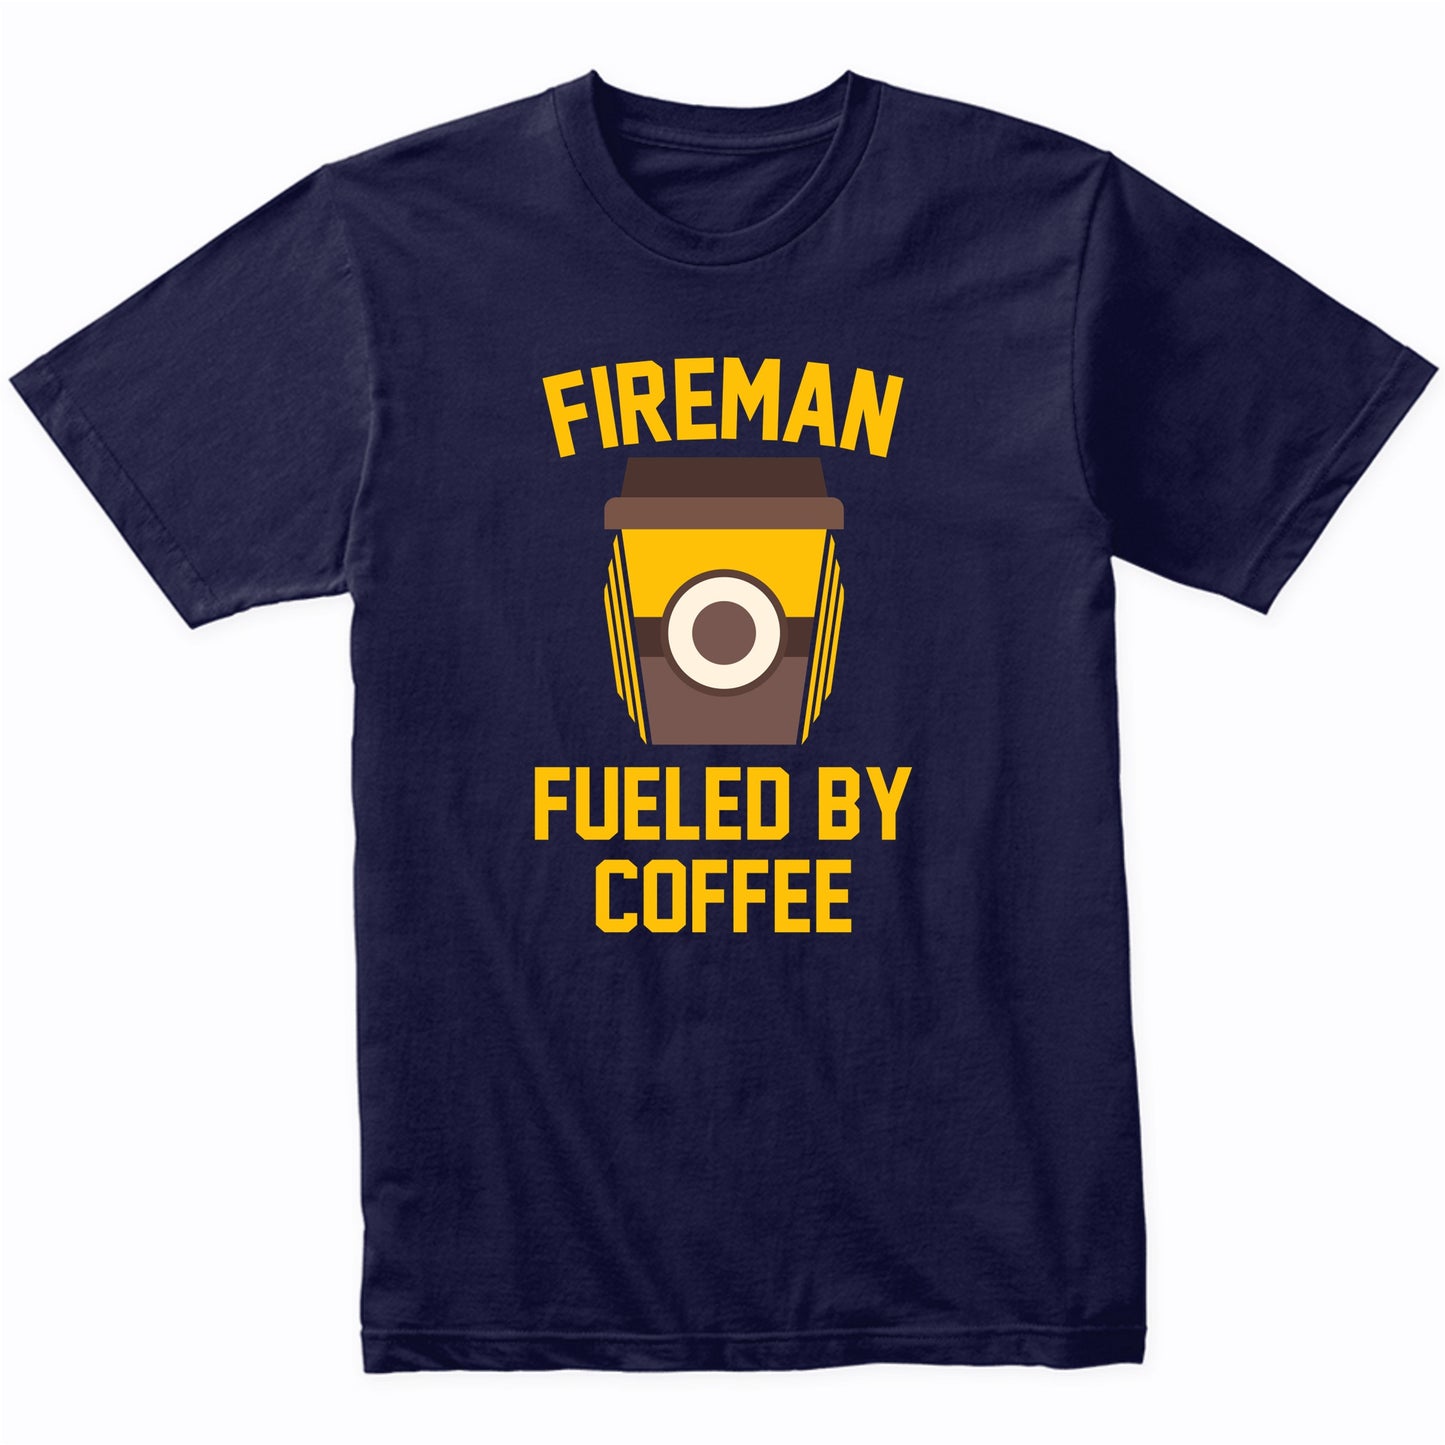 Fireman Fueled By Coffee Funny Firefighter Shirt